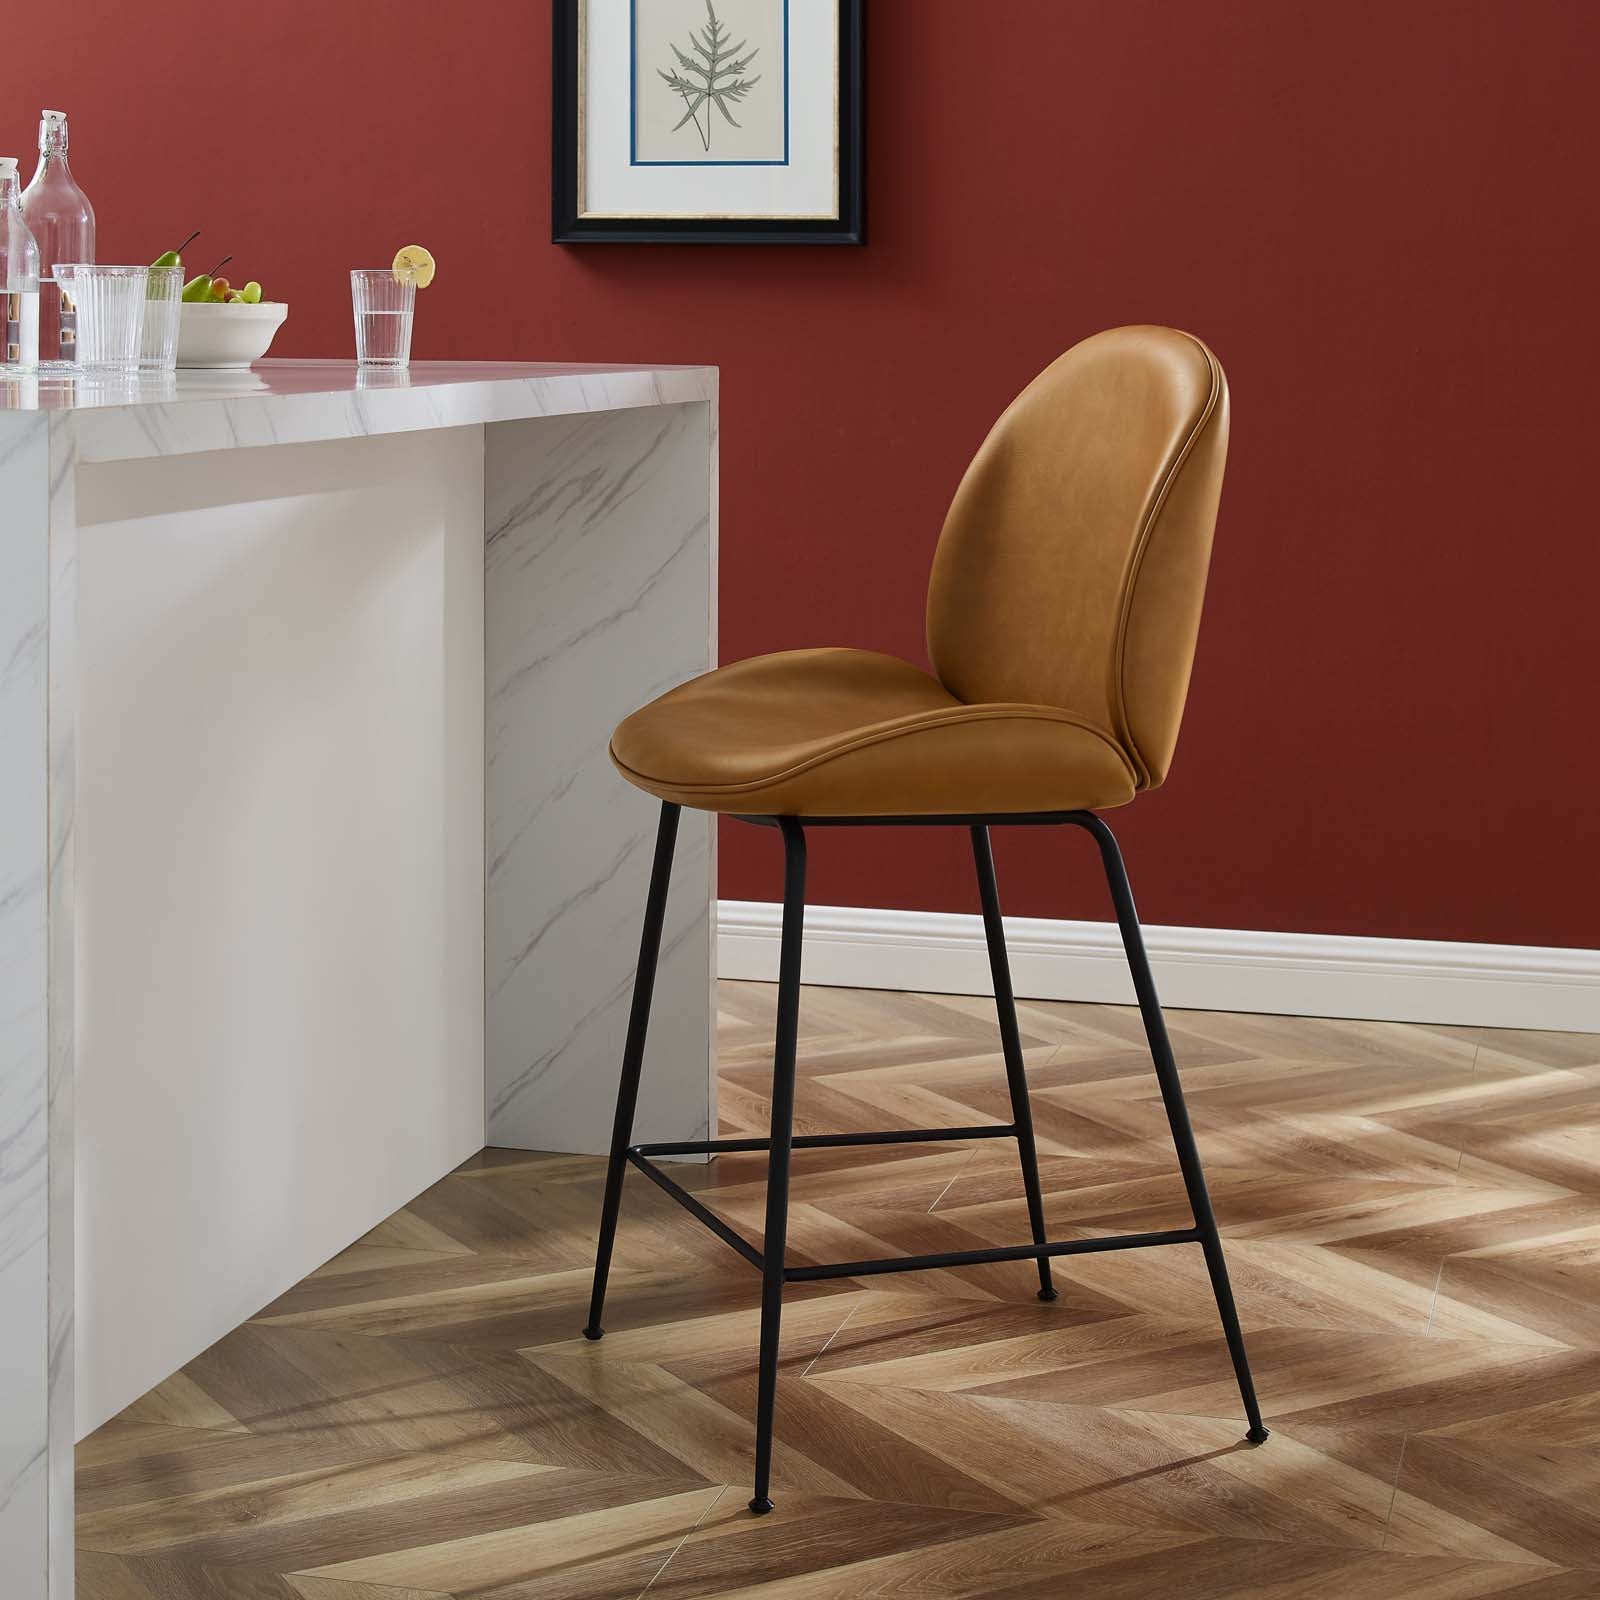 Scoop Black Powder Coated Steel Leg Vegan Leather Counter Stool-Counter Stool-Modway-Wall2Wall Furnishings